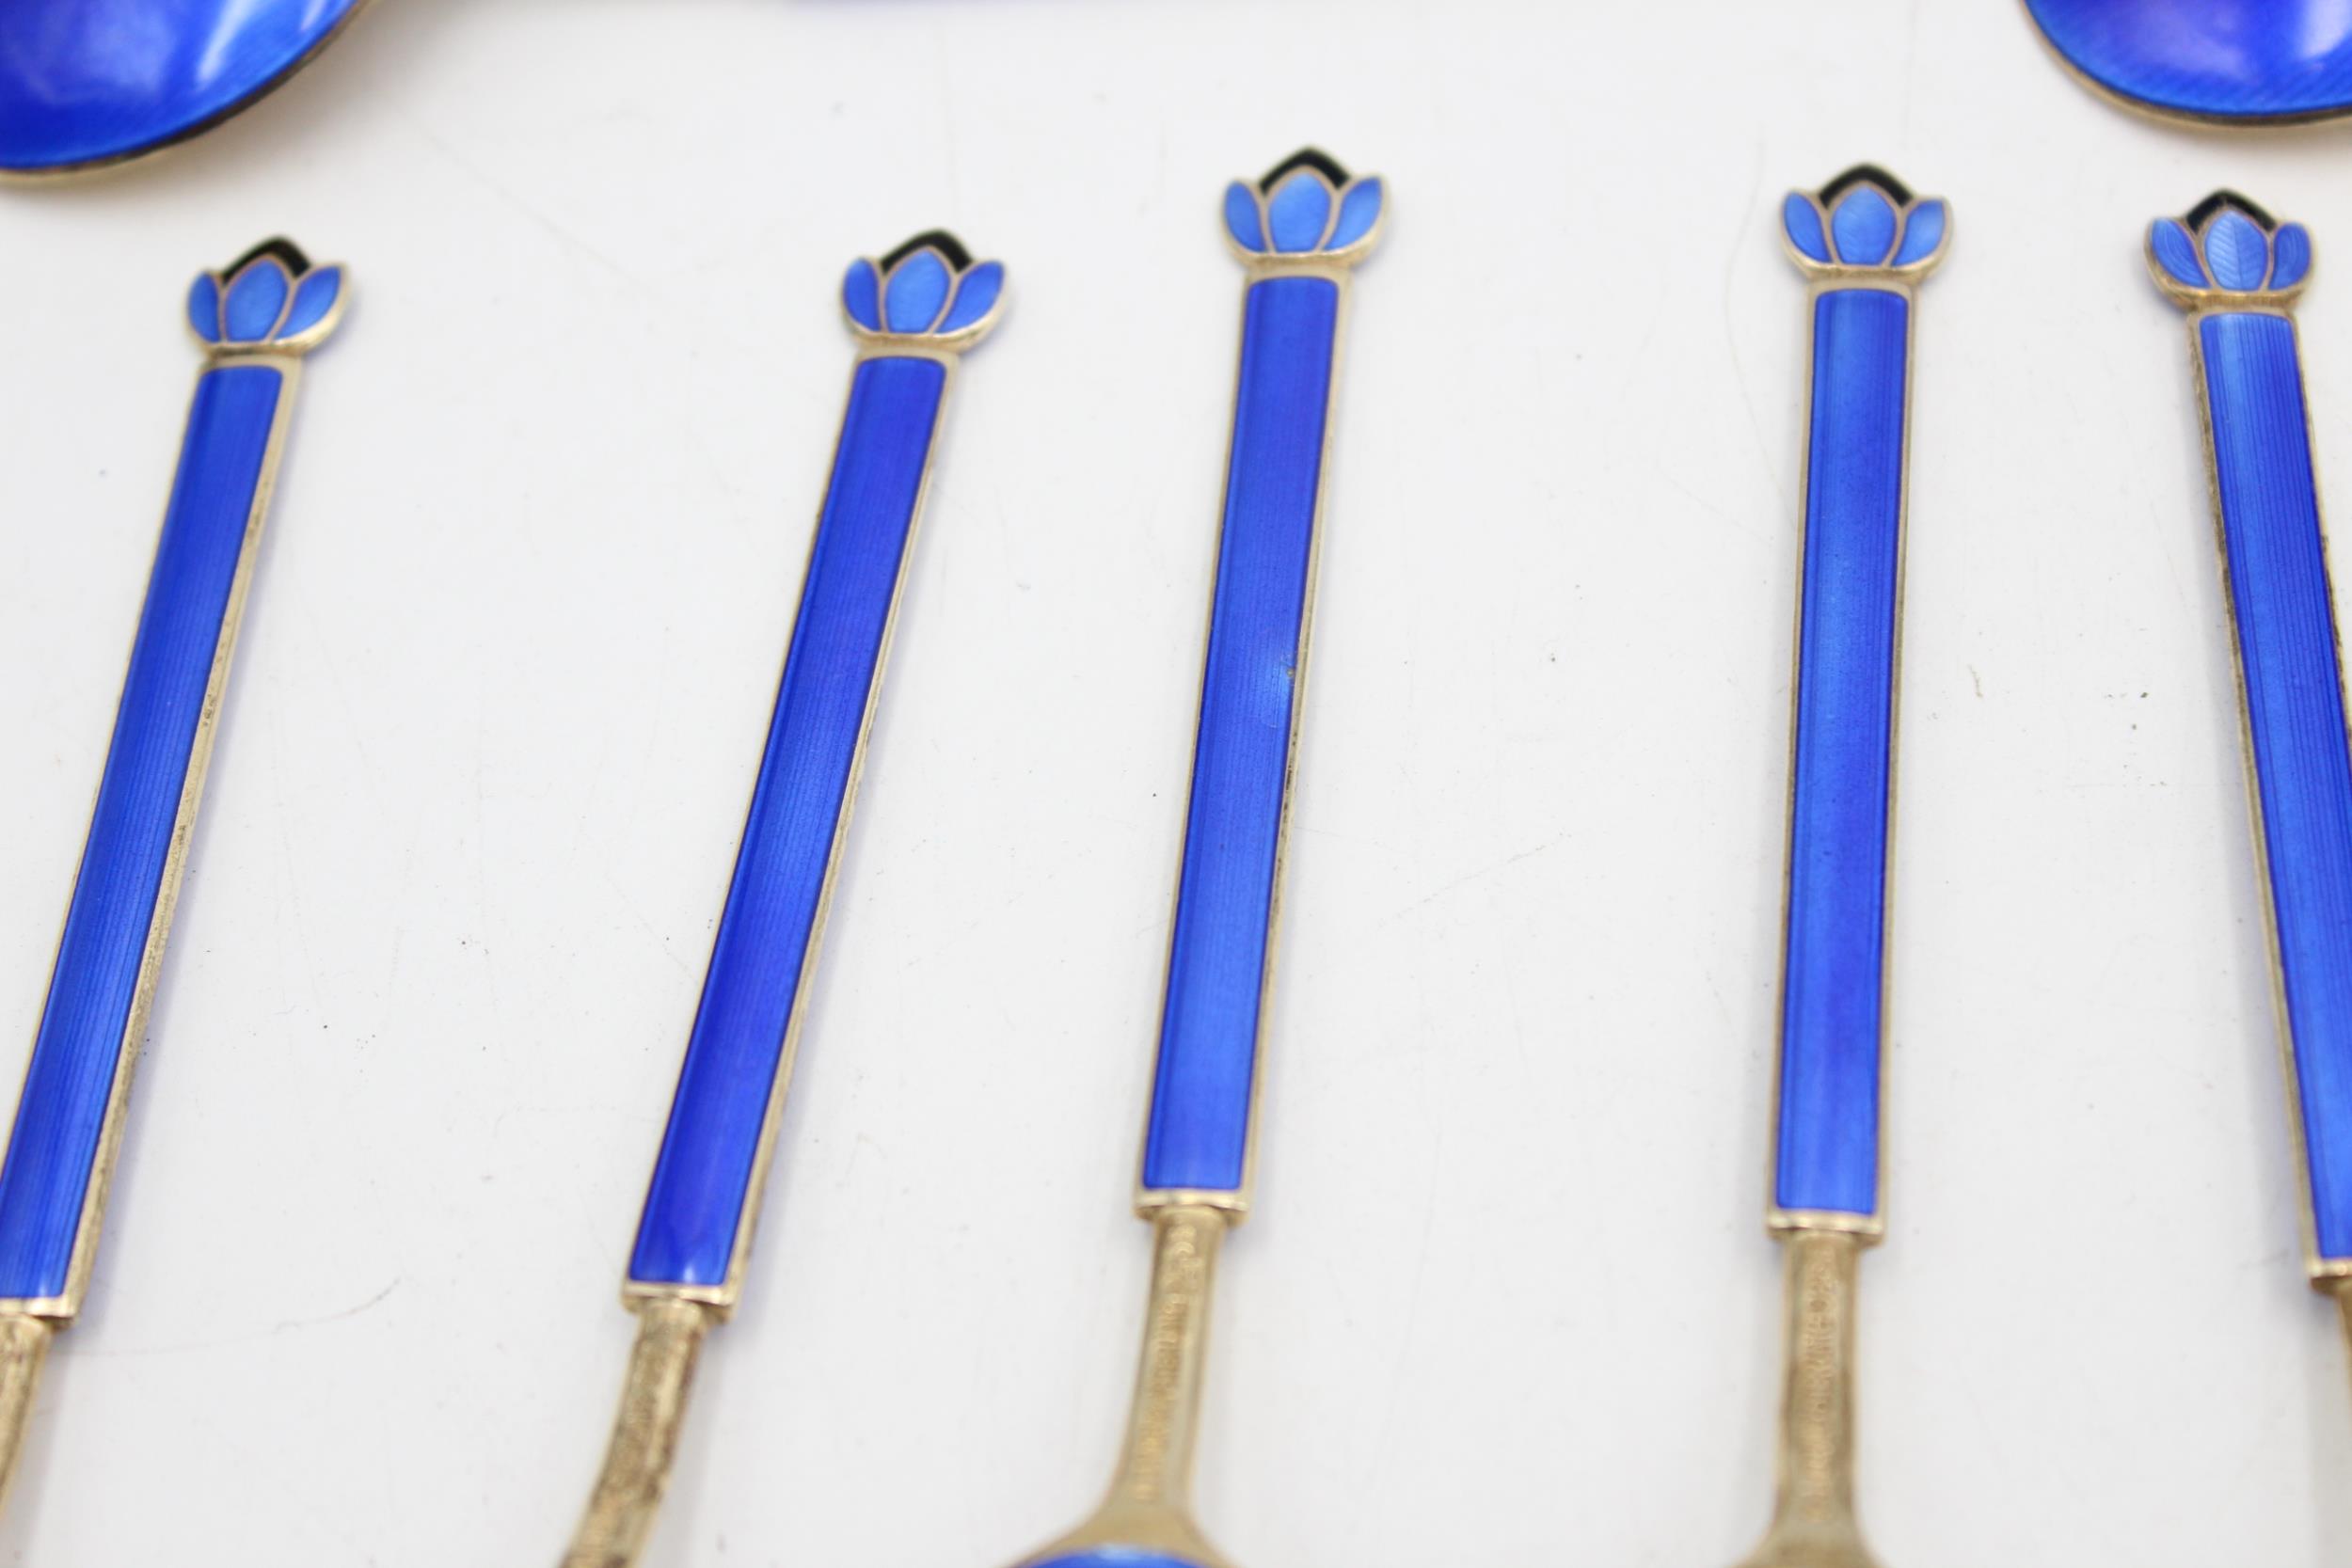 12 x Vintage Stamped .925 Norway STERLING SILVER David Anderson Spoons (278g) // w/ Blue Guilloche - Image 6 of 9